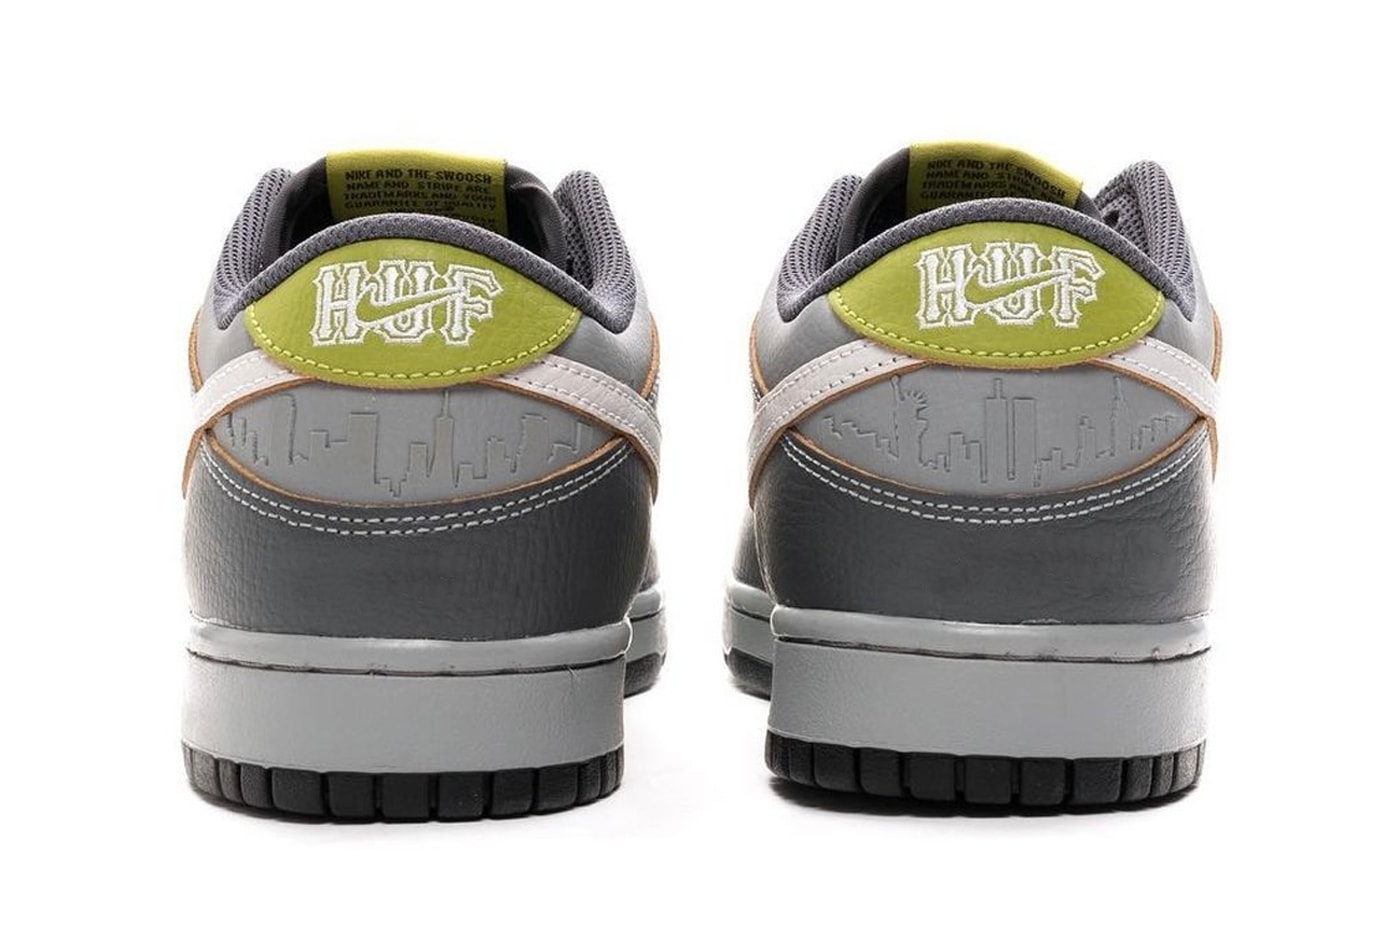 HUF Nike SB Dunk Low City Pack Full Look Release Info Date Buy Price NYC San Francisco Friends and Family